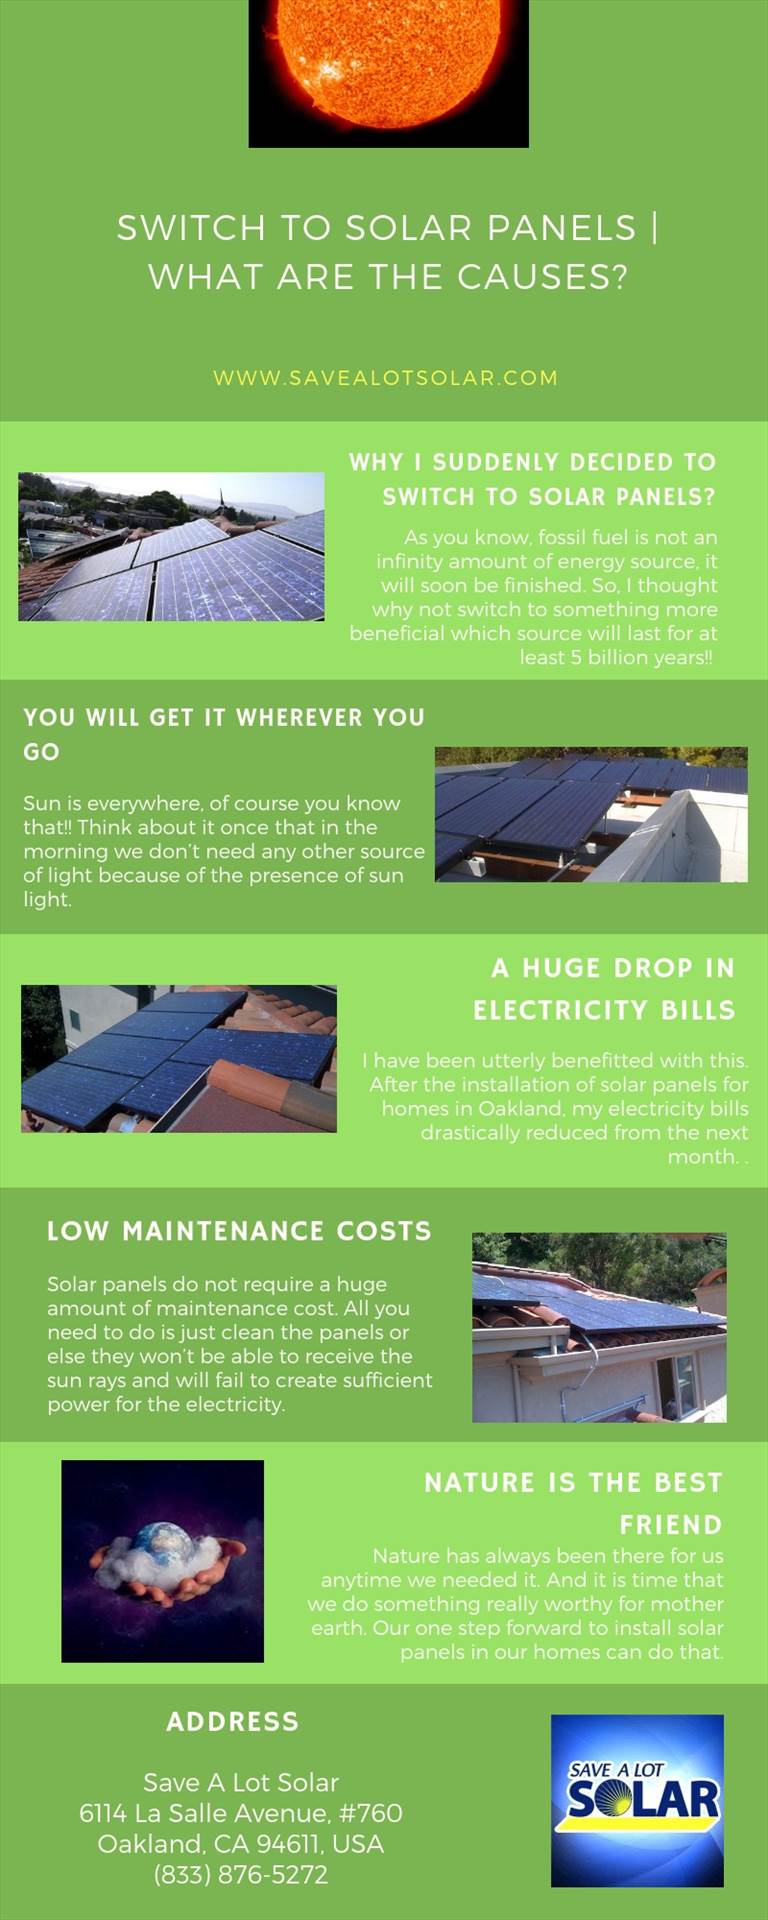 Switch to Solar Panels | what are the Causes? Solar panels for homes in Oakland are utterly profitable for you as well as the nature. How? Read my link to know more…
https://bit.ly/2SYkNVb by savealotsolarus